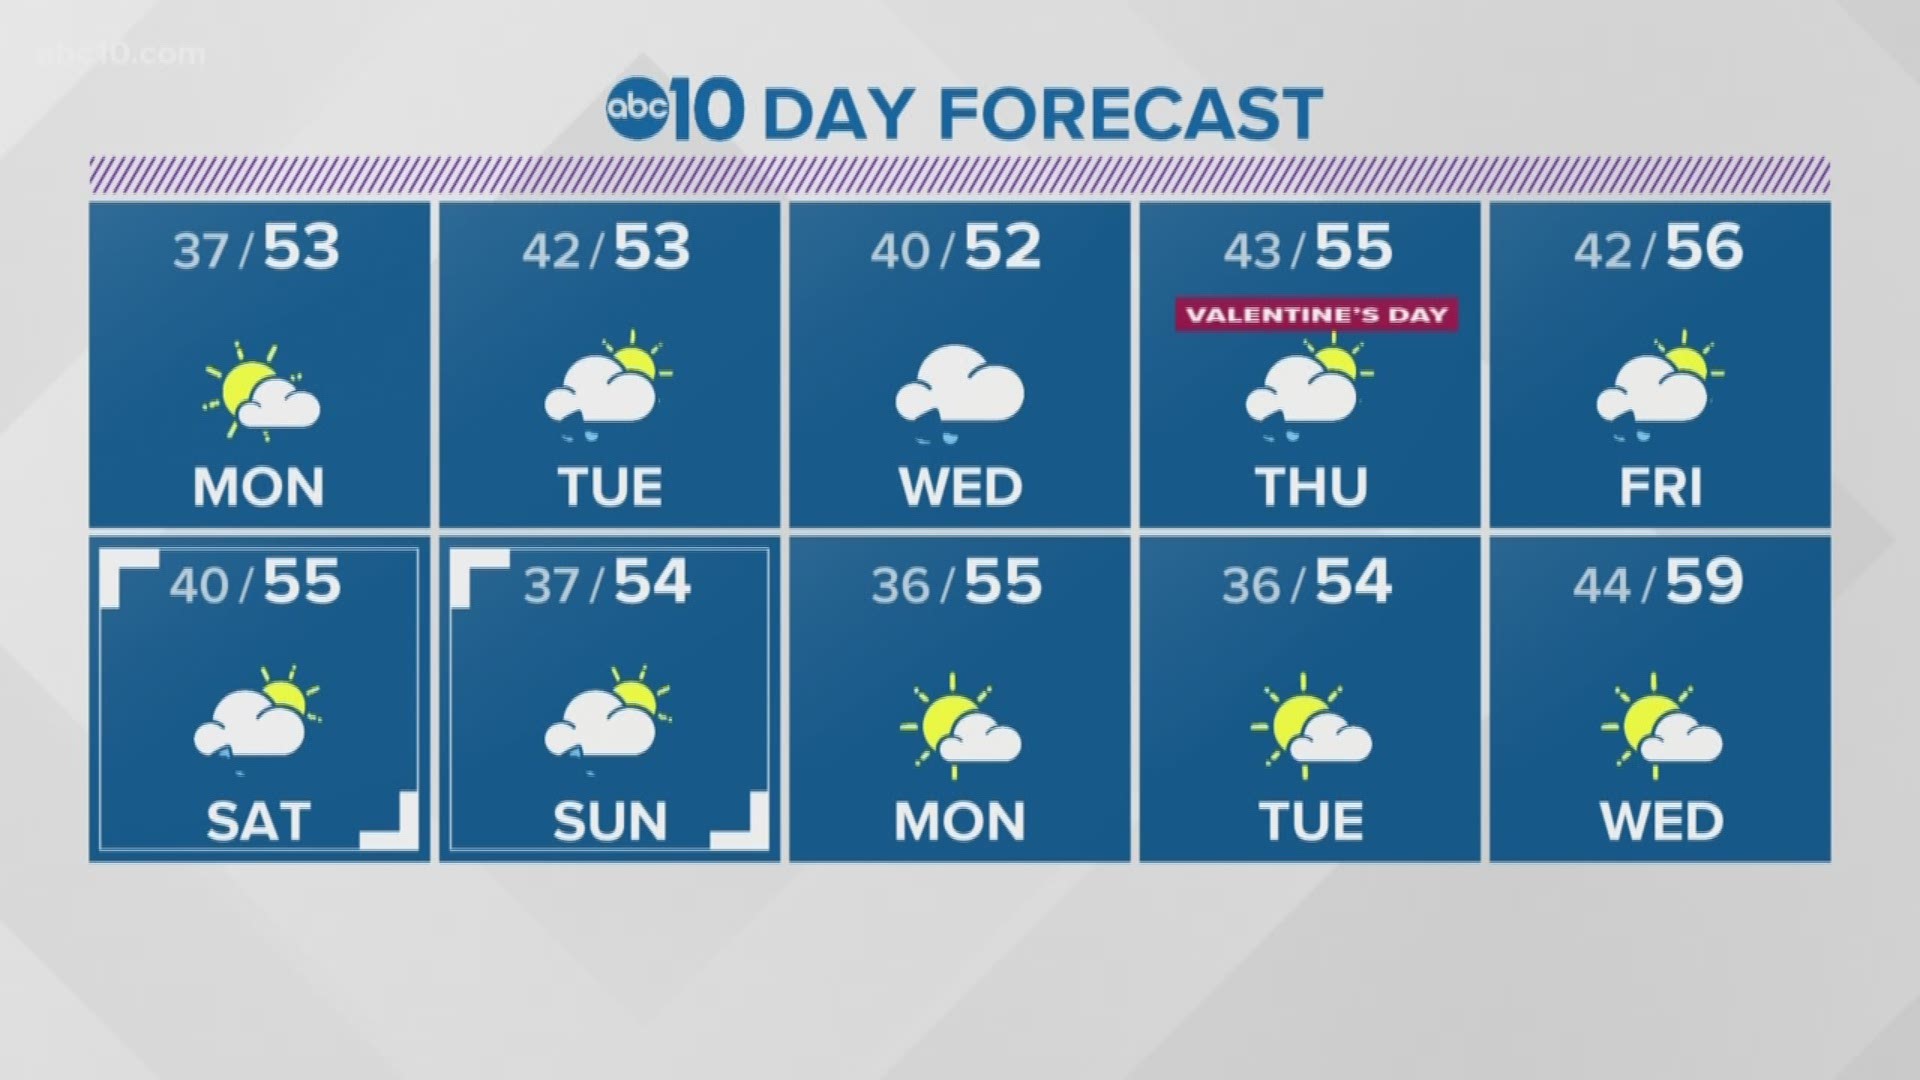 A cold start to your Monday with some sunshine expected before more rain arrives mid-week